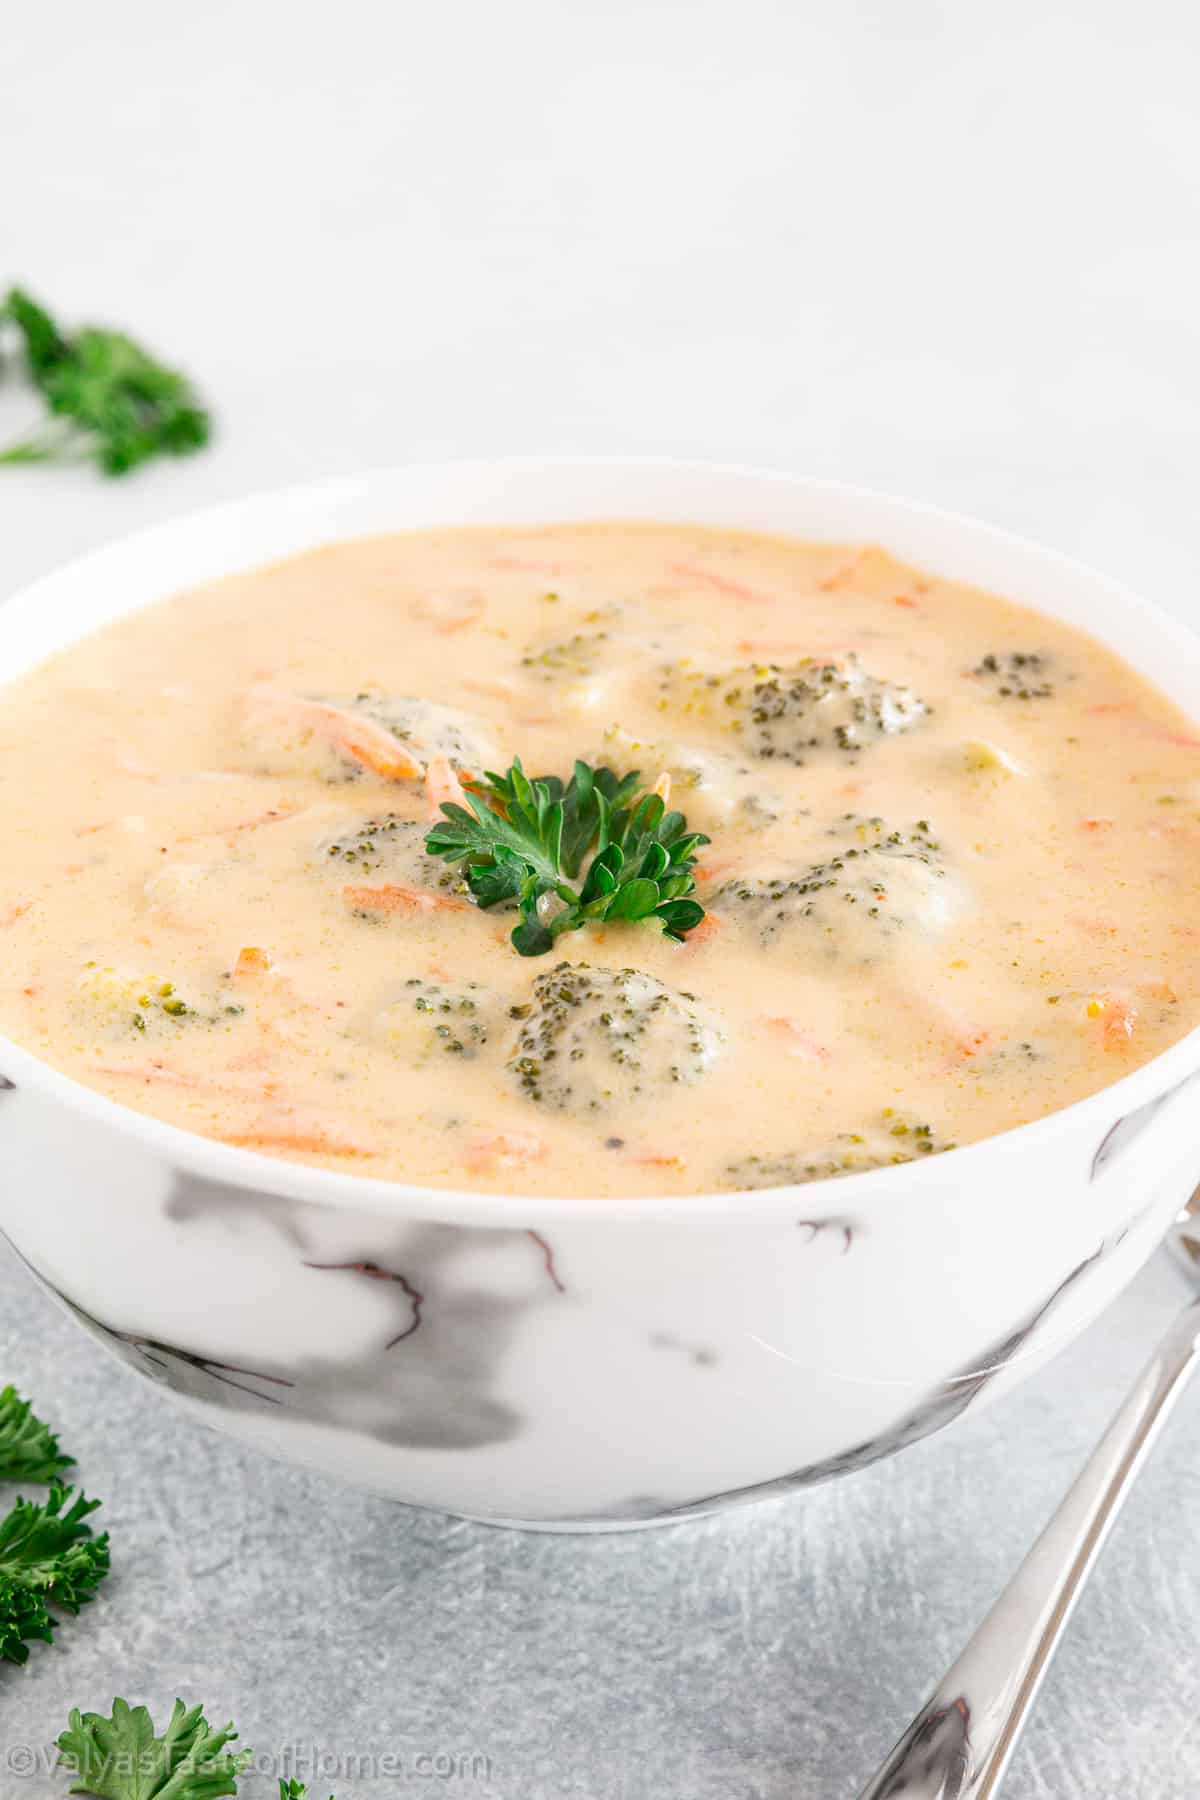 This Broccoli and Cheddar Soup is incredibly easy to make and will be ready in under 30 minutes! It's creamy, hearty, and the perfect comfort food!